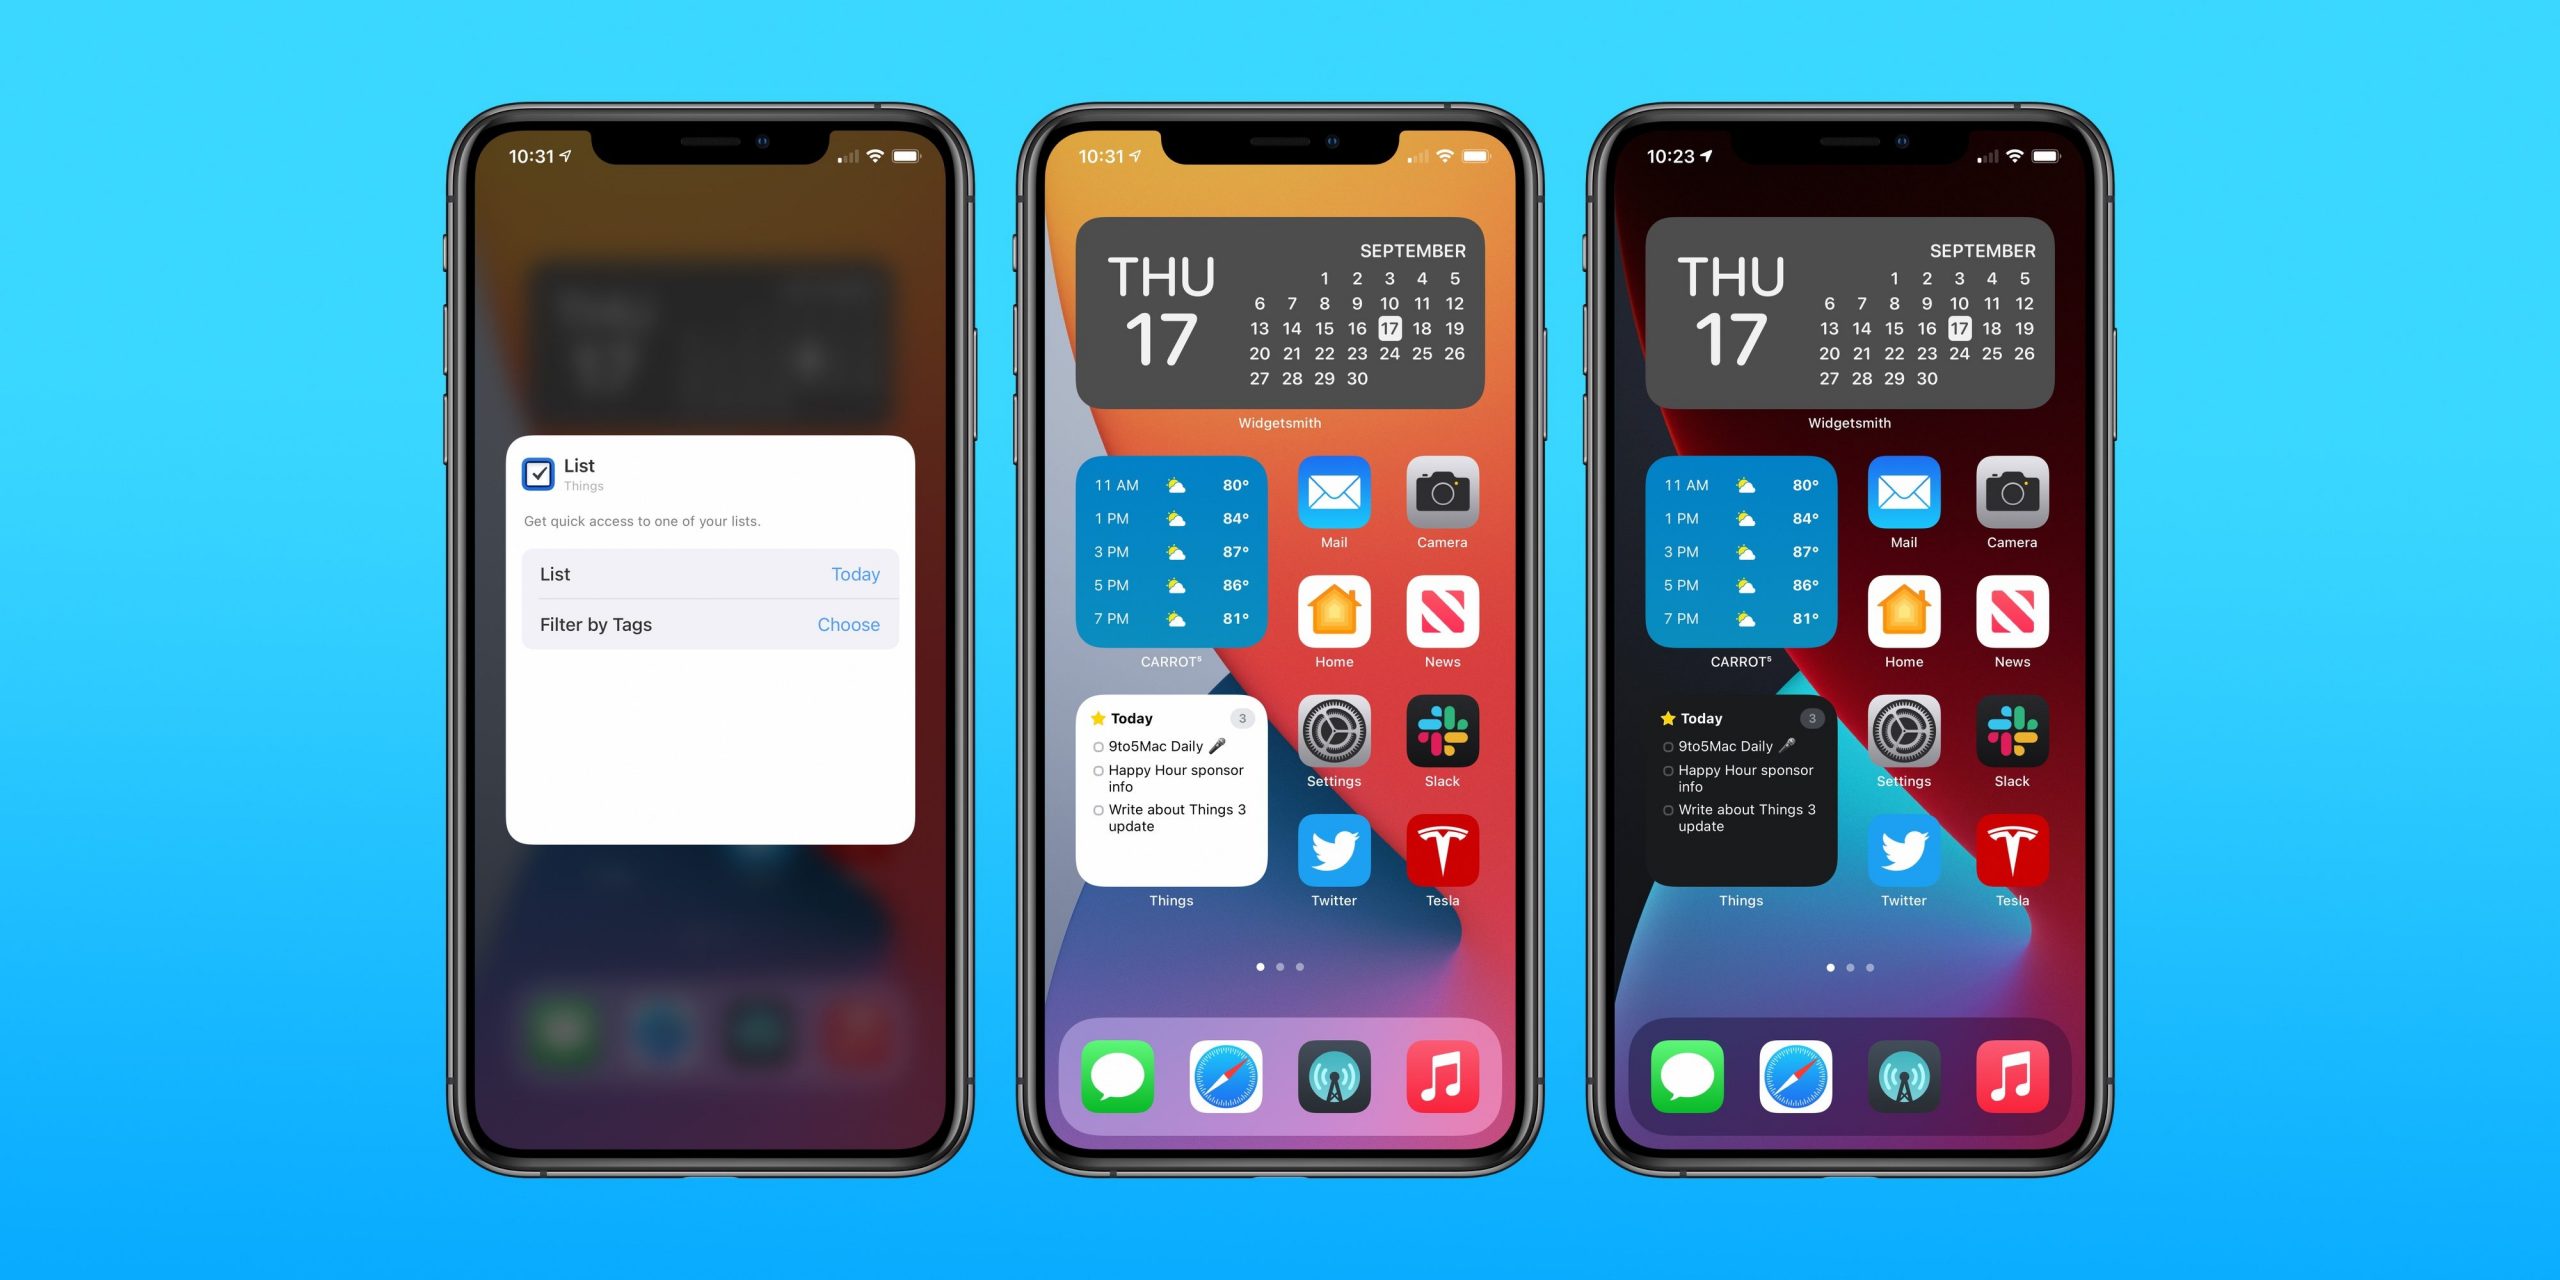 Topics 3 Task Manager Adds versatile home screen widgets, new Apple Watch issues and more